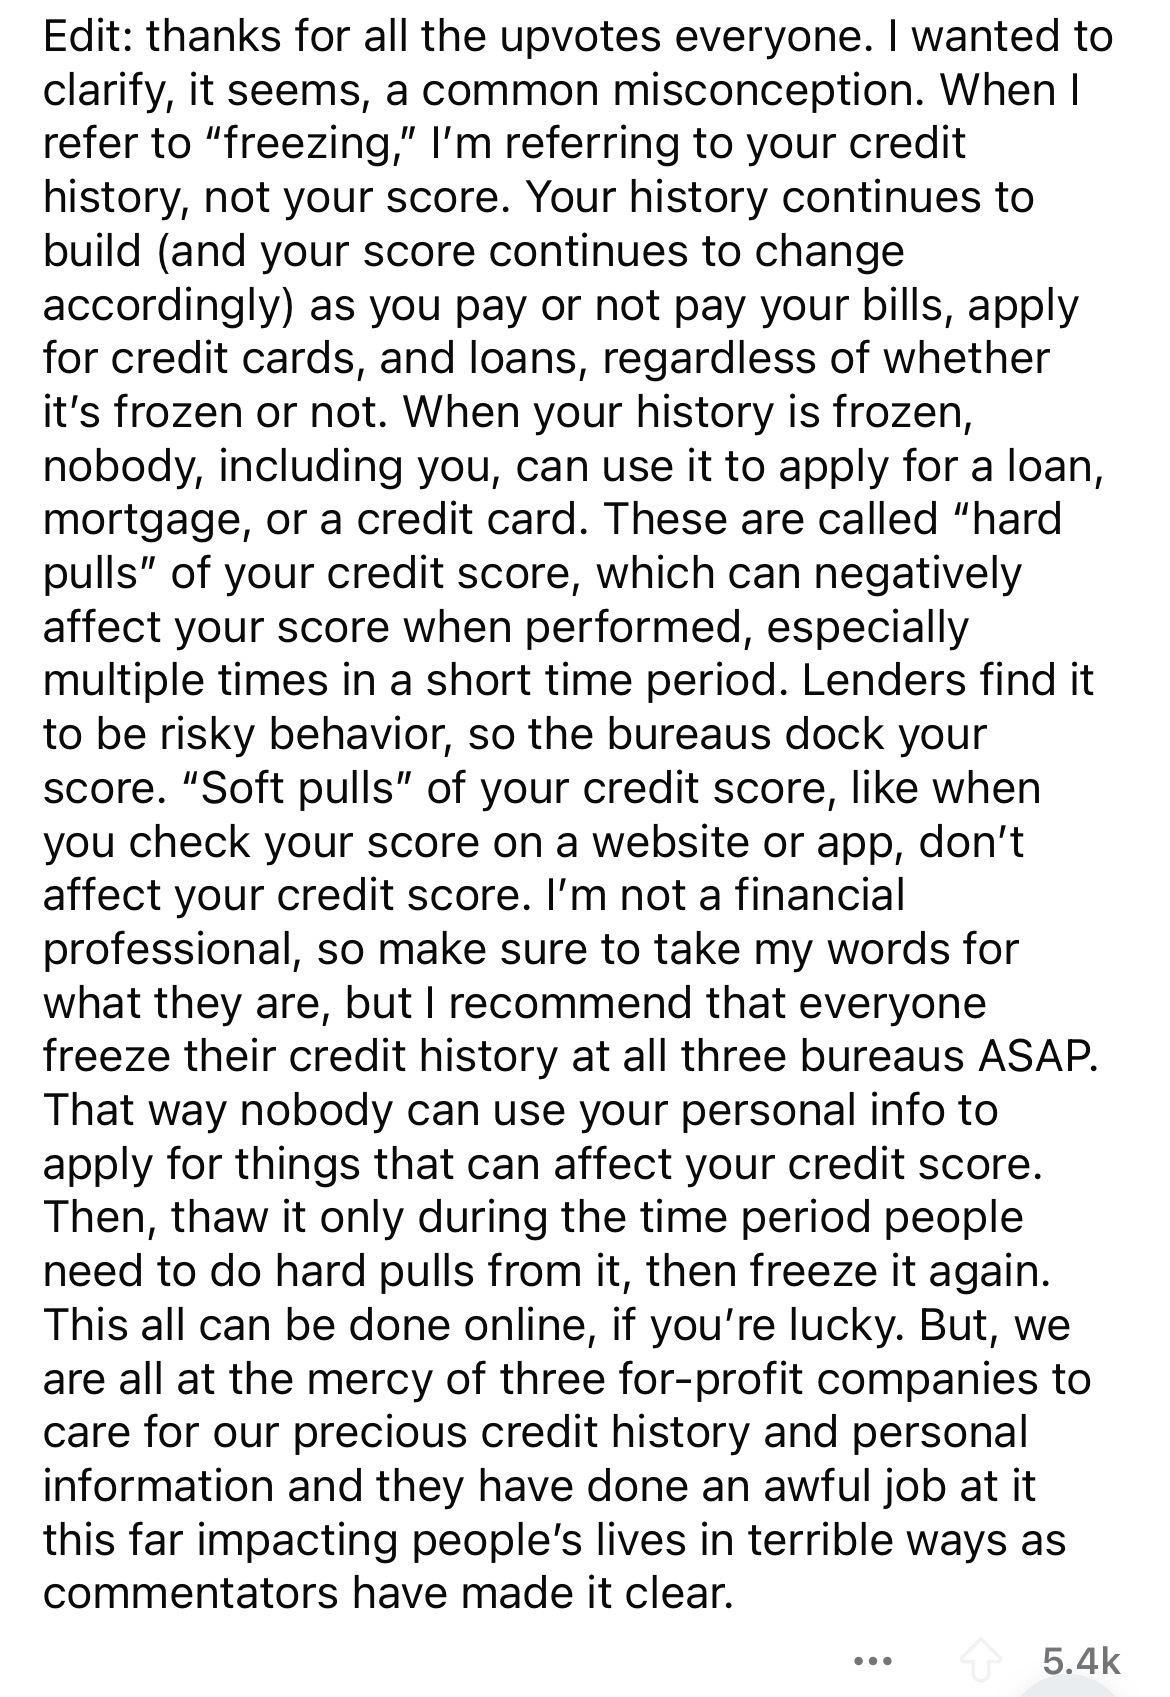 document - Edit thanks for all the upvotes everyone. I wanted to clarify, it seems, a common misconception. When I refer to "freezing," I'm referring to your credit history, not your score. Your history continues to build and your score continues to chang